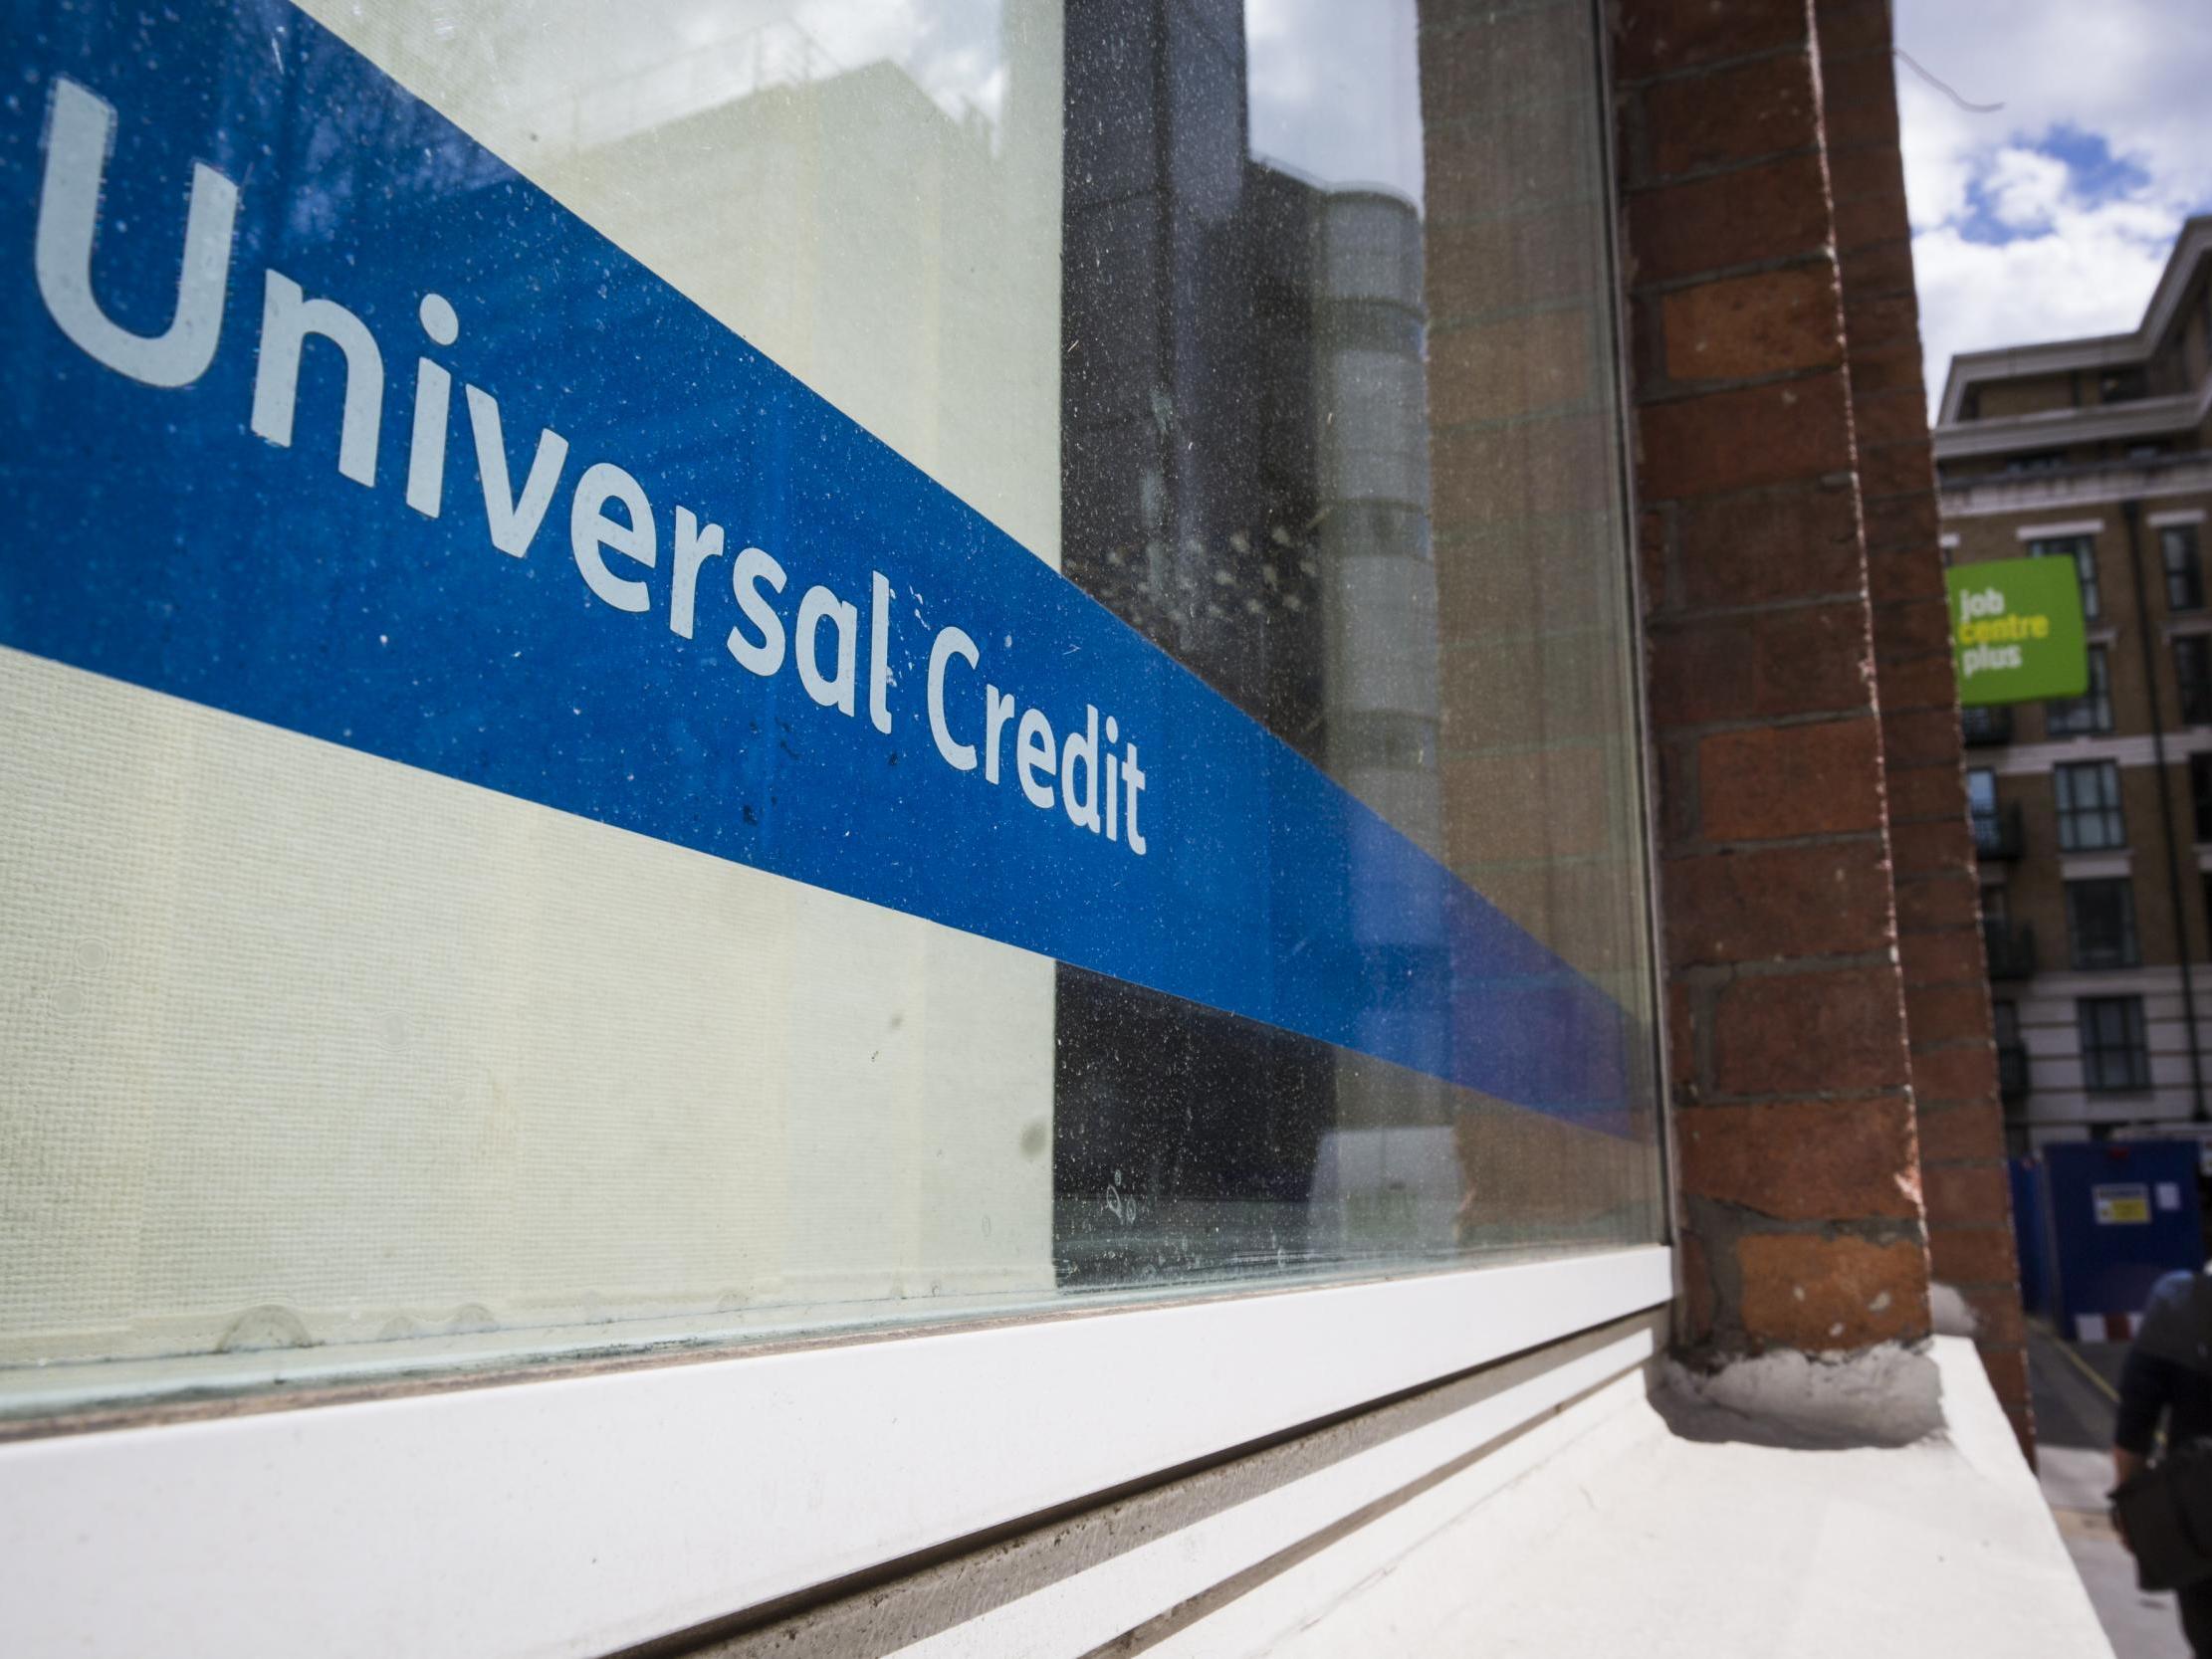 Universal credit has been causing problems for Britons since being rolled out across the country